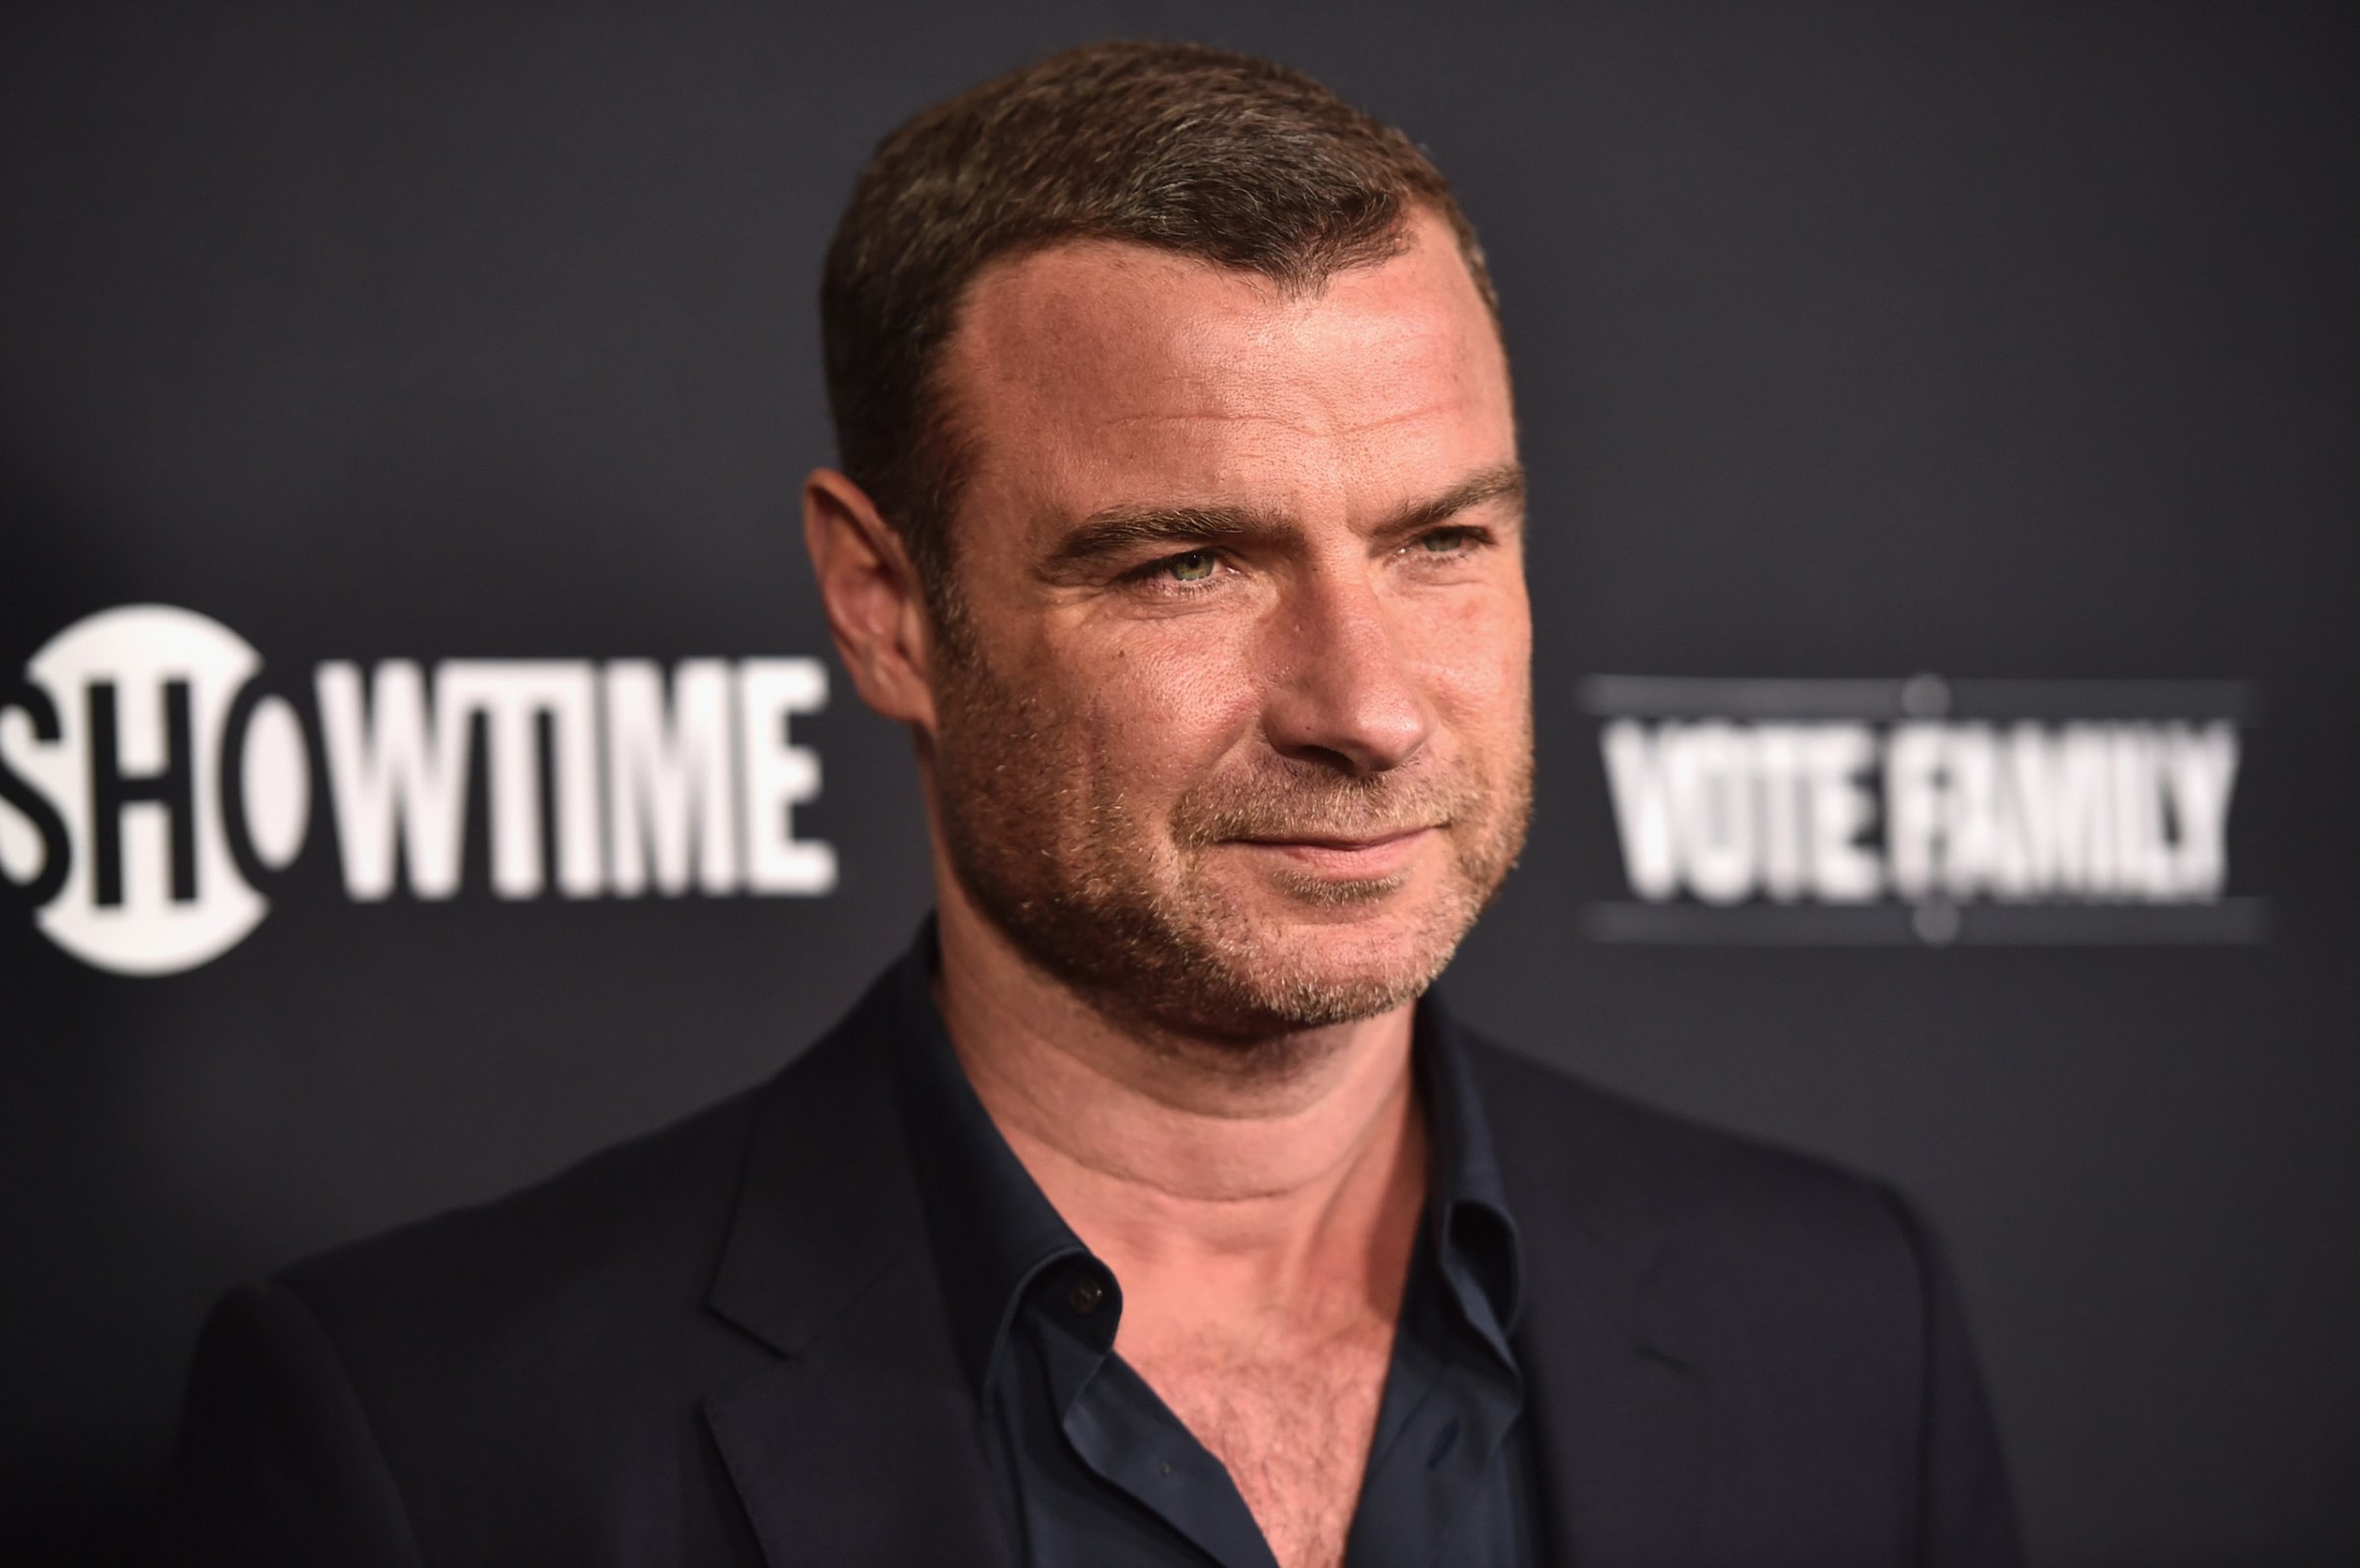 Liev Schreiber attends the For Your Consideration screening and panel for Showtime's 'Ray Donovan' at Paramount Theatre in Hollywood on April 25, 2016.